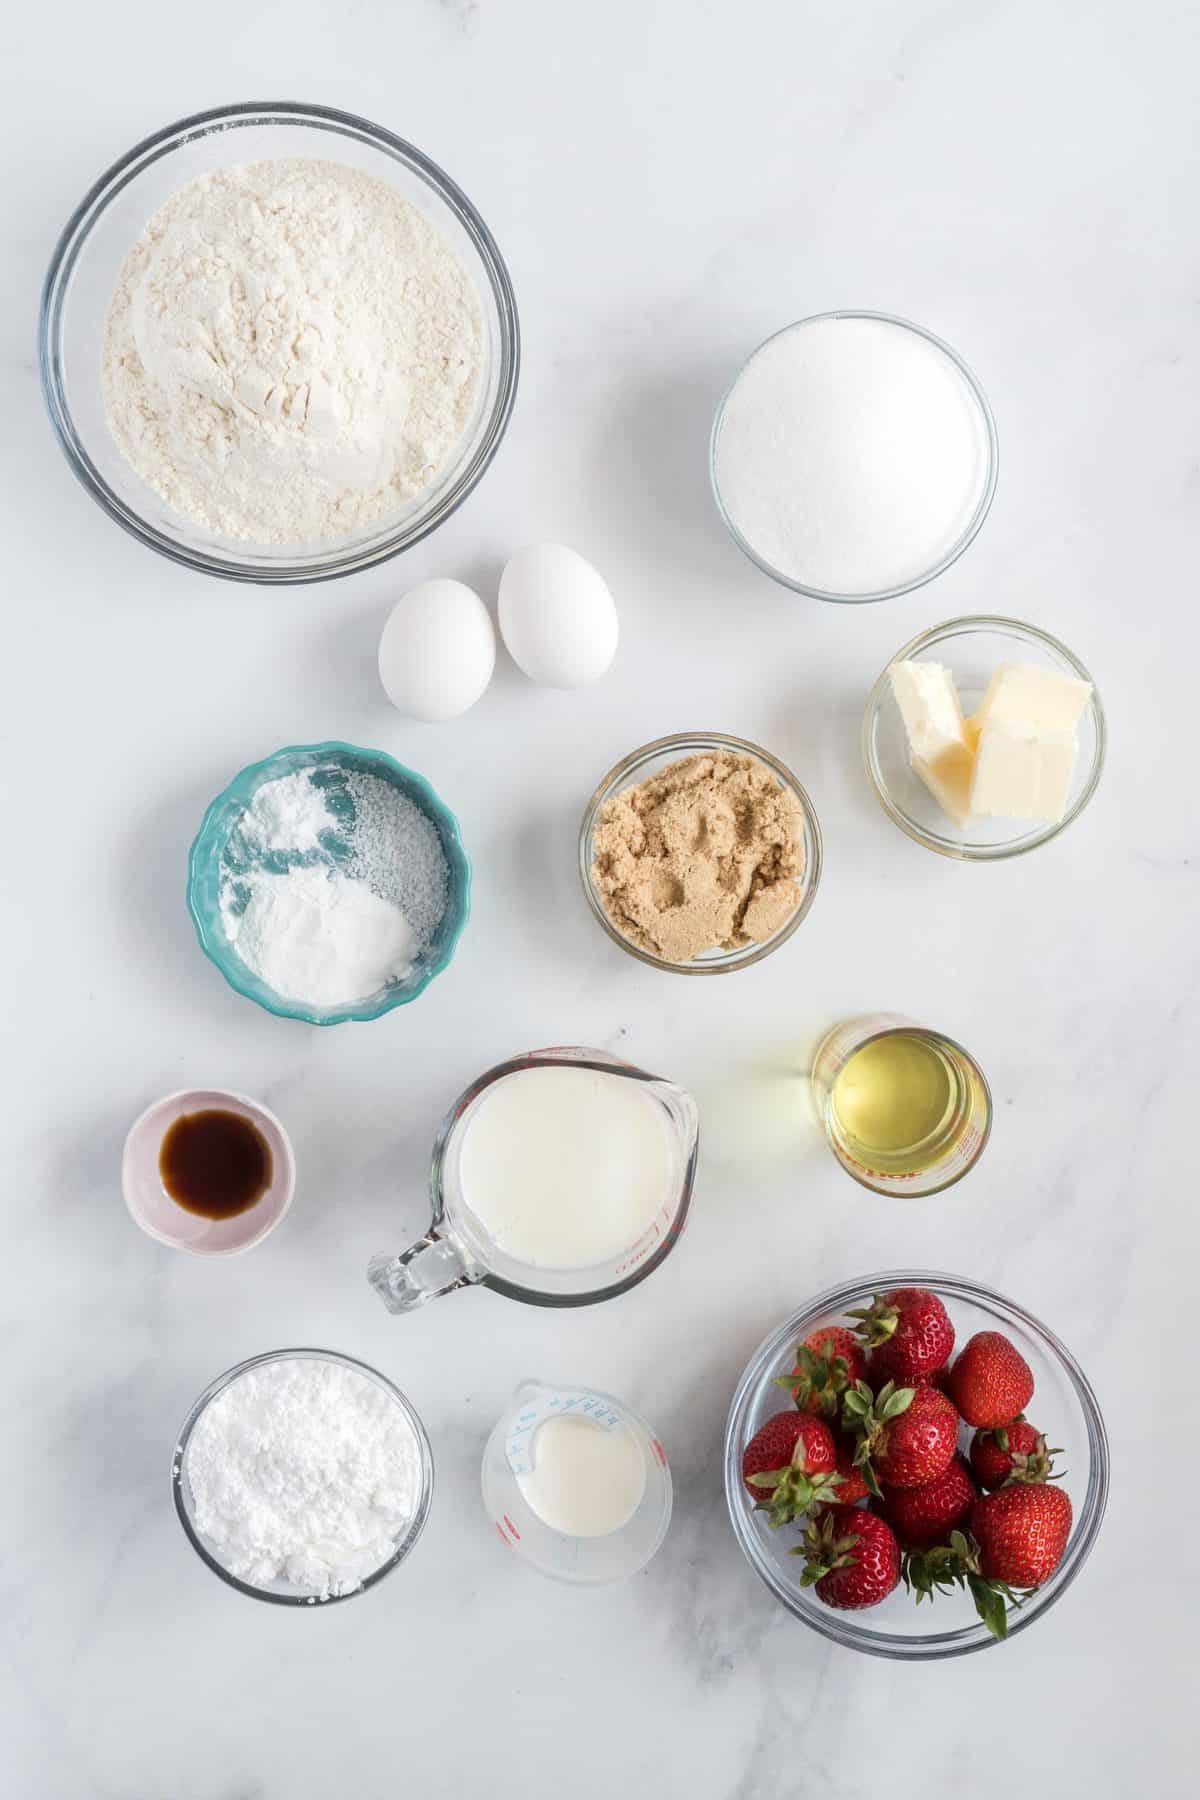 All of the ingredients in small glass bowls laid out on a white background. 